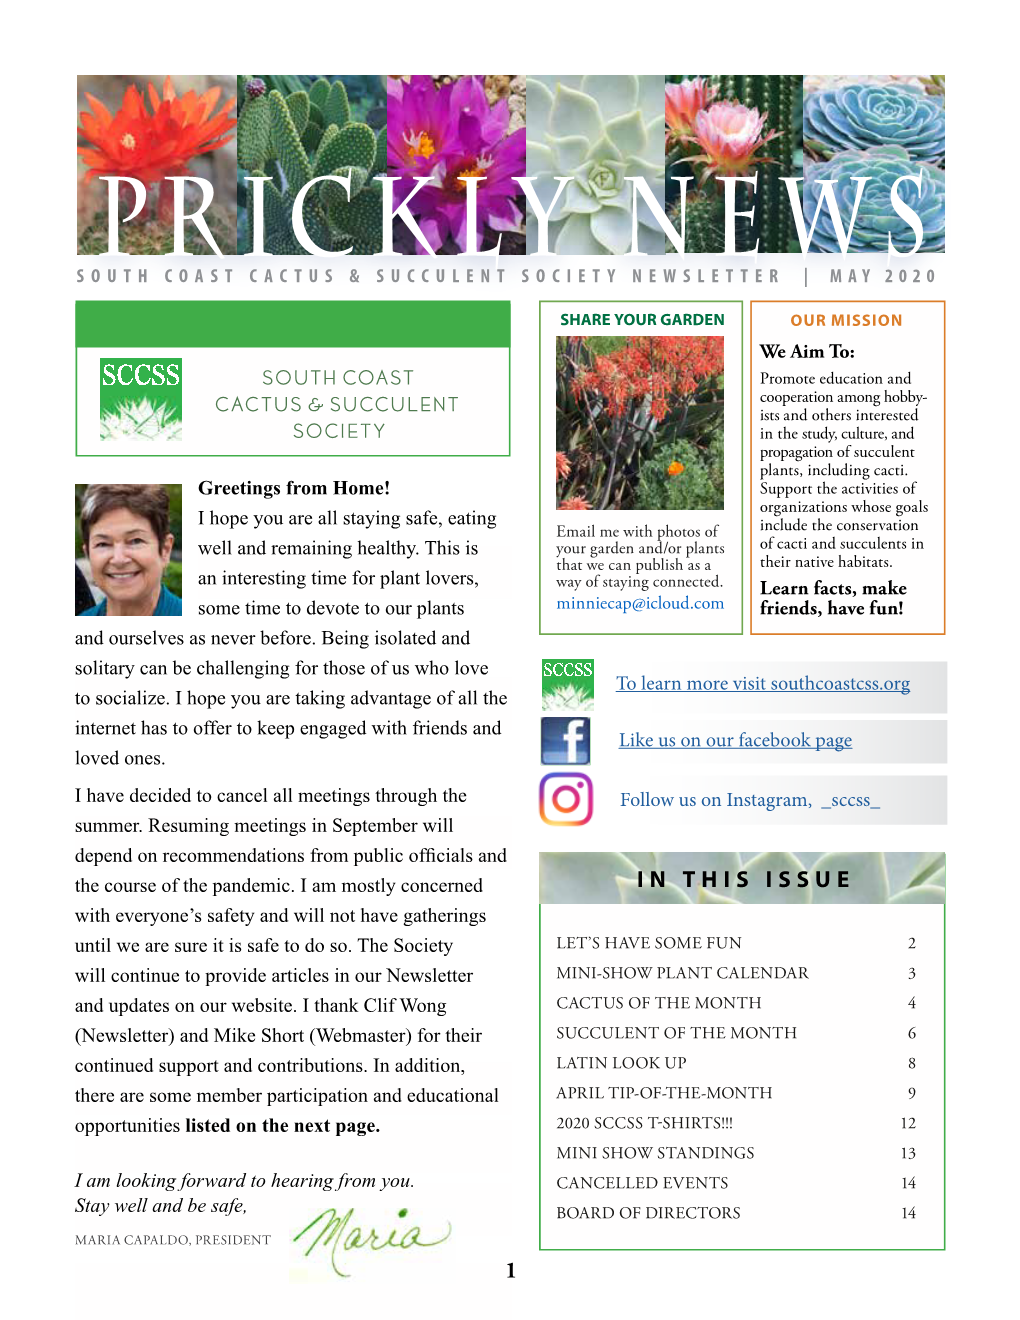 Prickly News South Coast Cactus & Succulent Society Newsletter | May 2020